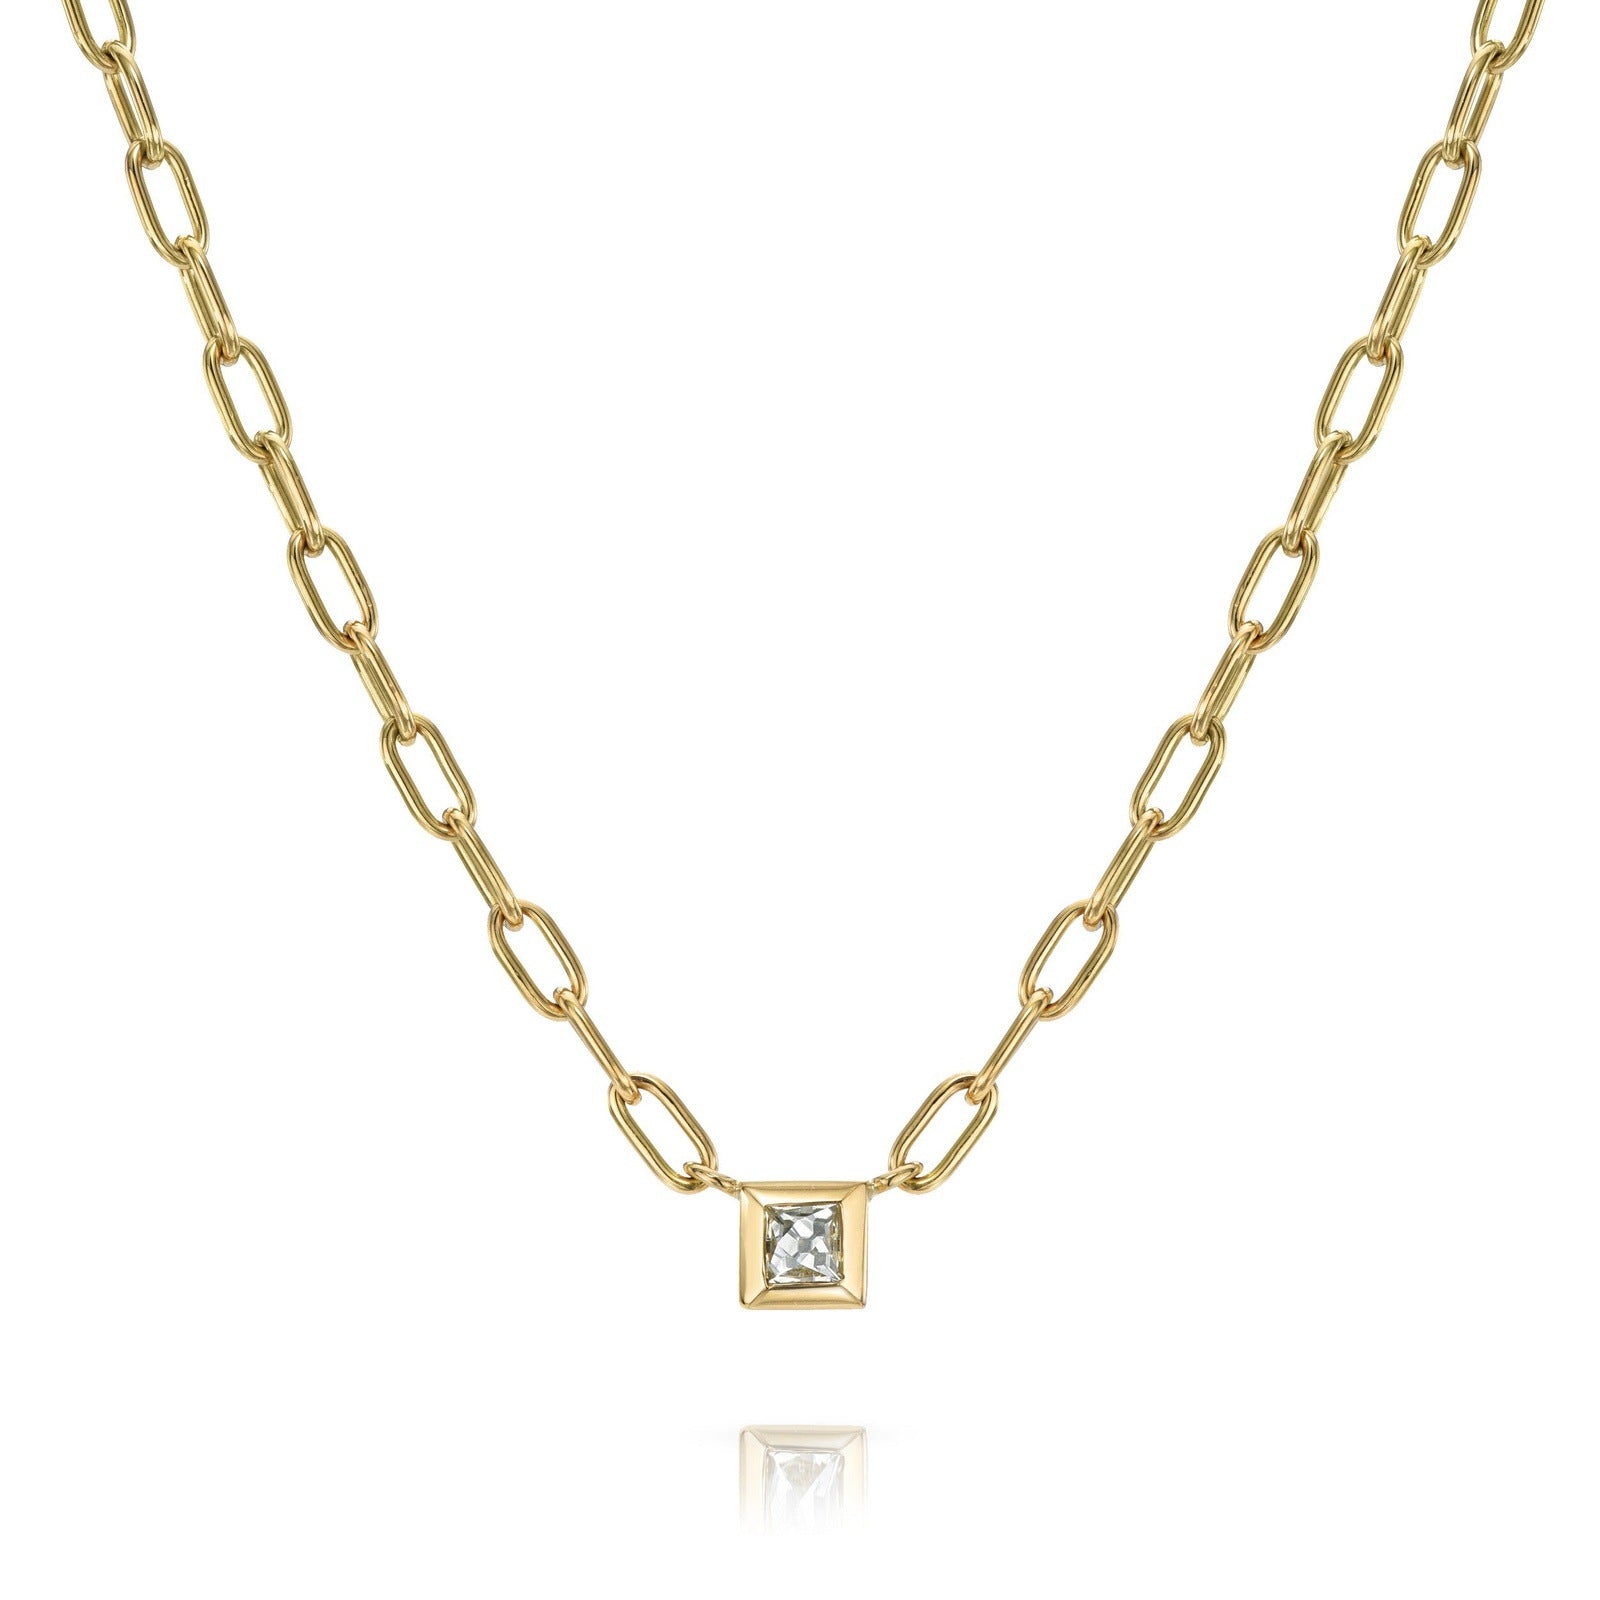 Single Stone KARINA NECKLACE featuring 0.35ct J-K/VS French cut diamond bezel set on a handcrafted 18K yellow gold pendant necklace. Necklace measures 17"